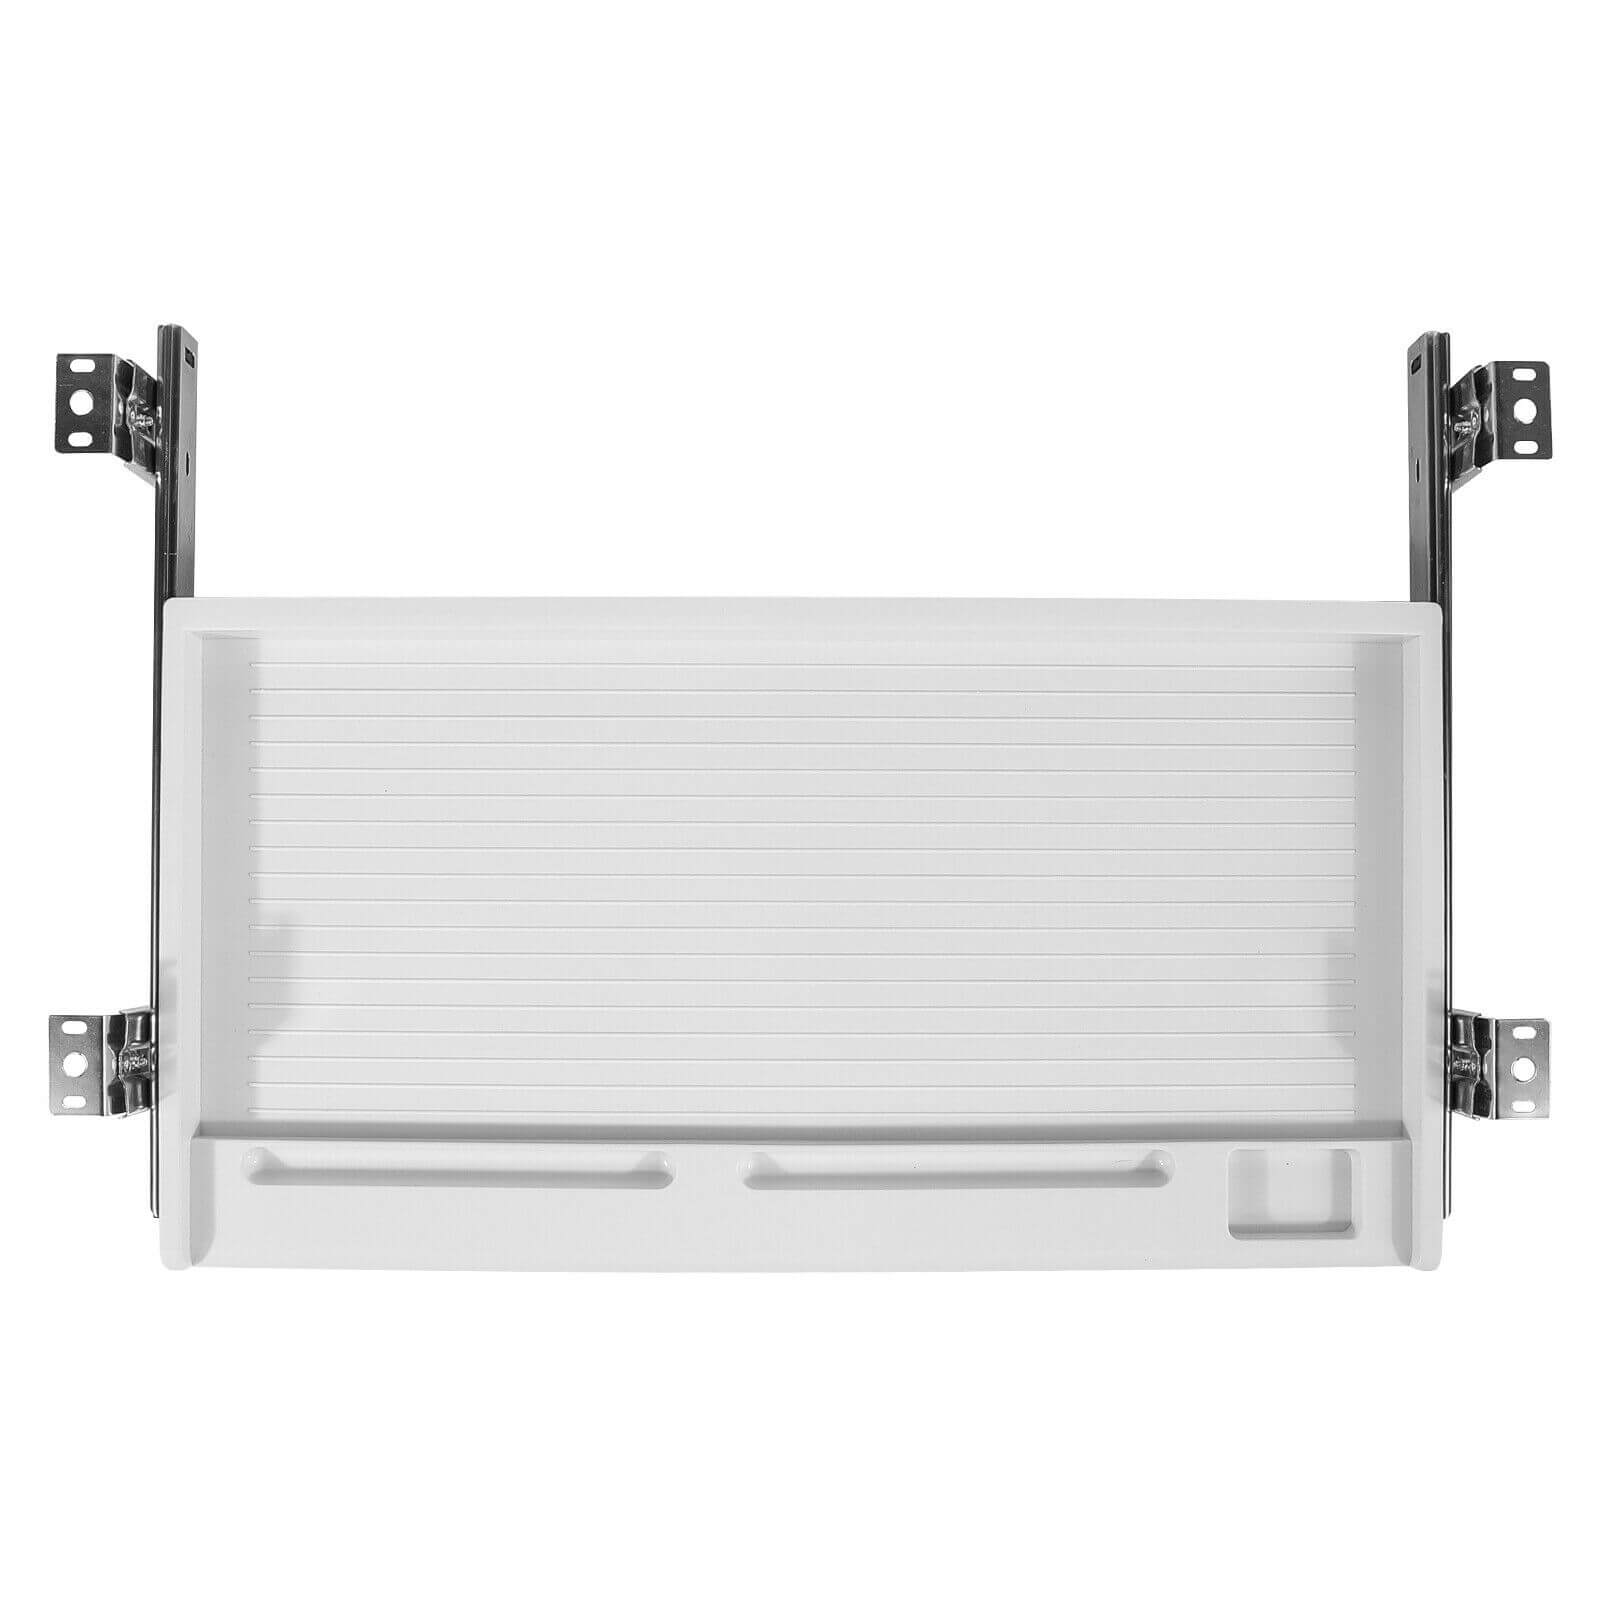 White of 22x15" Under Desk Keyboard Mouse Tray